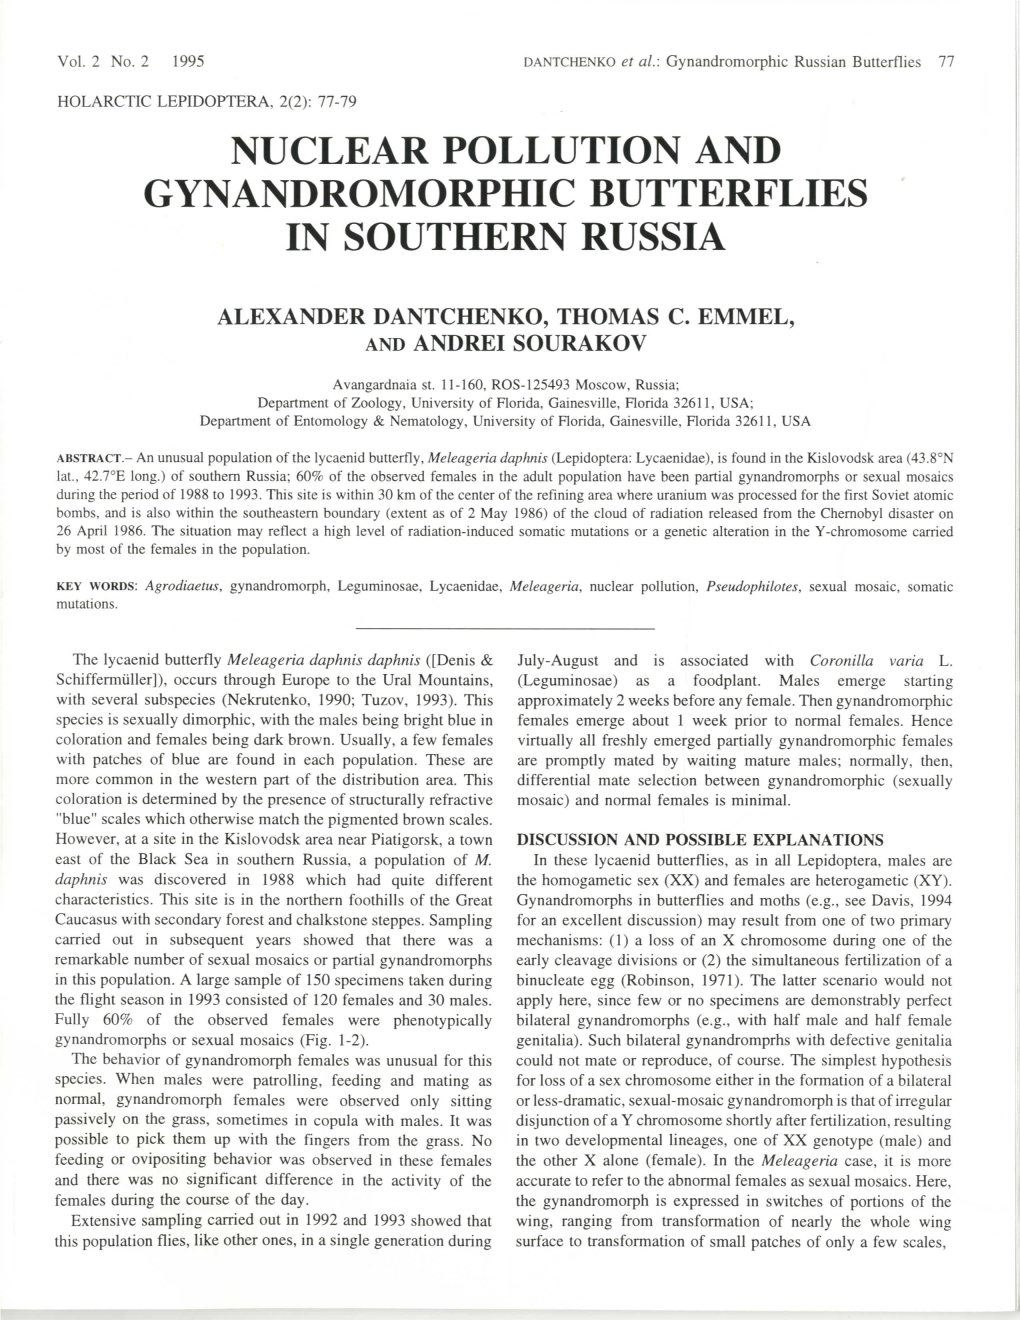 Nuclear Pollution and Gynandromorphic Butterflies in Southern Russia